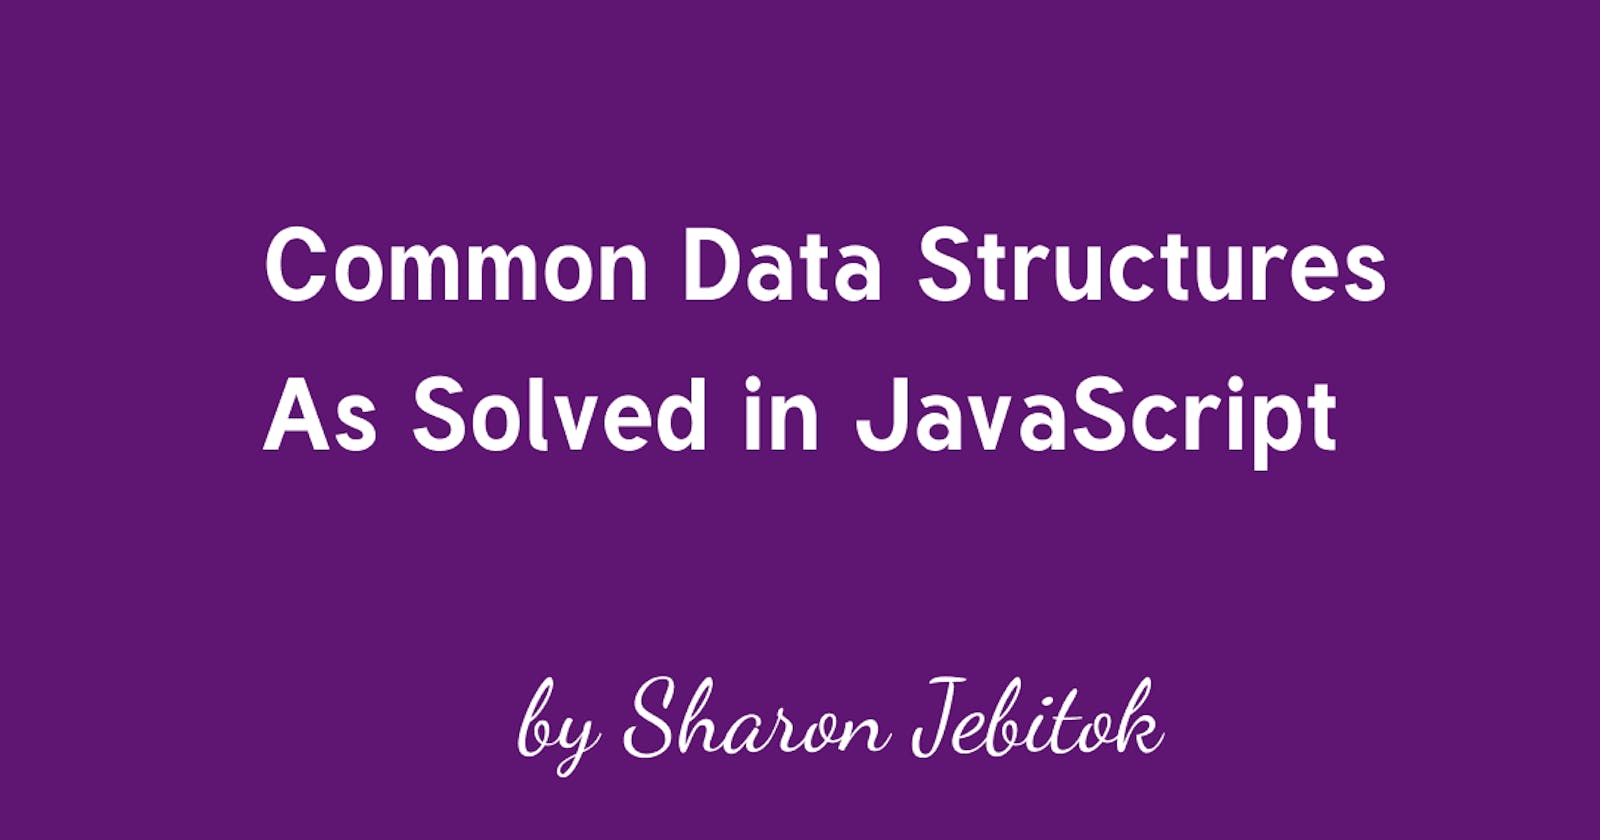 Common Data Structures and Algorithms used in JavaScript